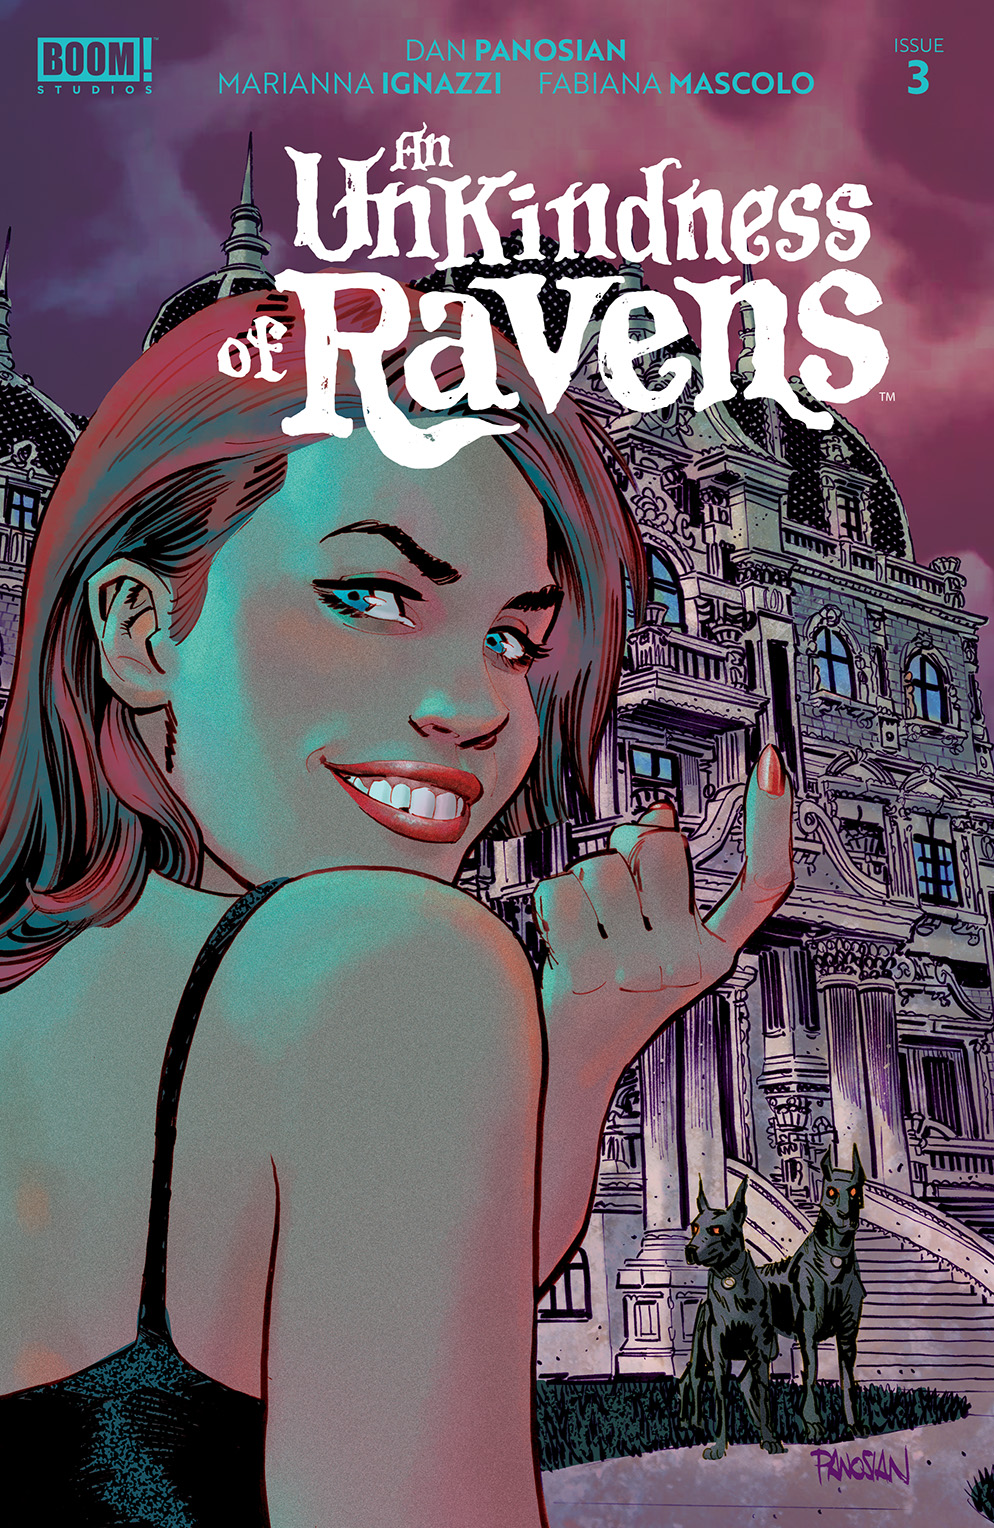 Unkindness of Ravens #3 Cover A Main